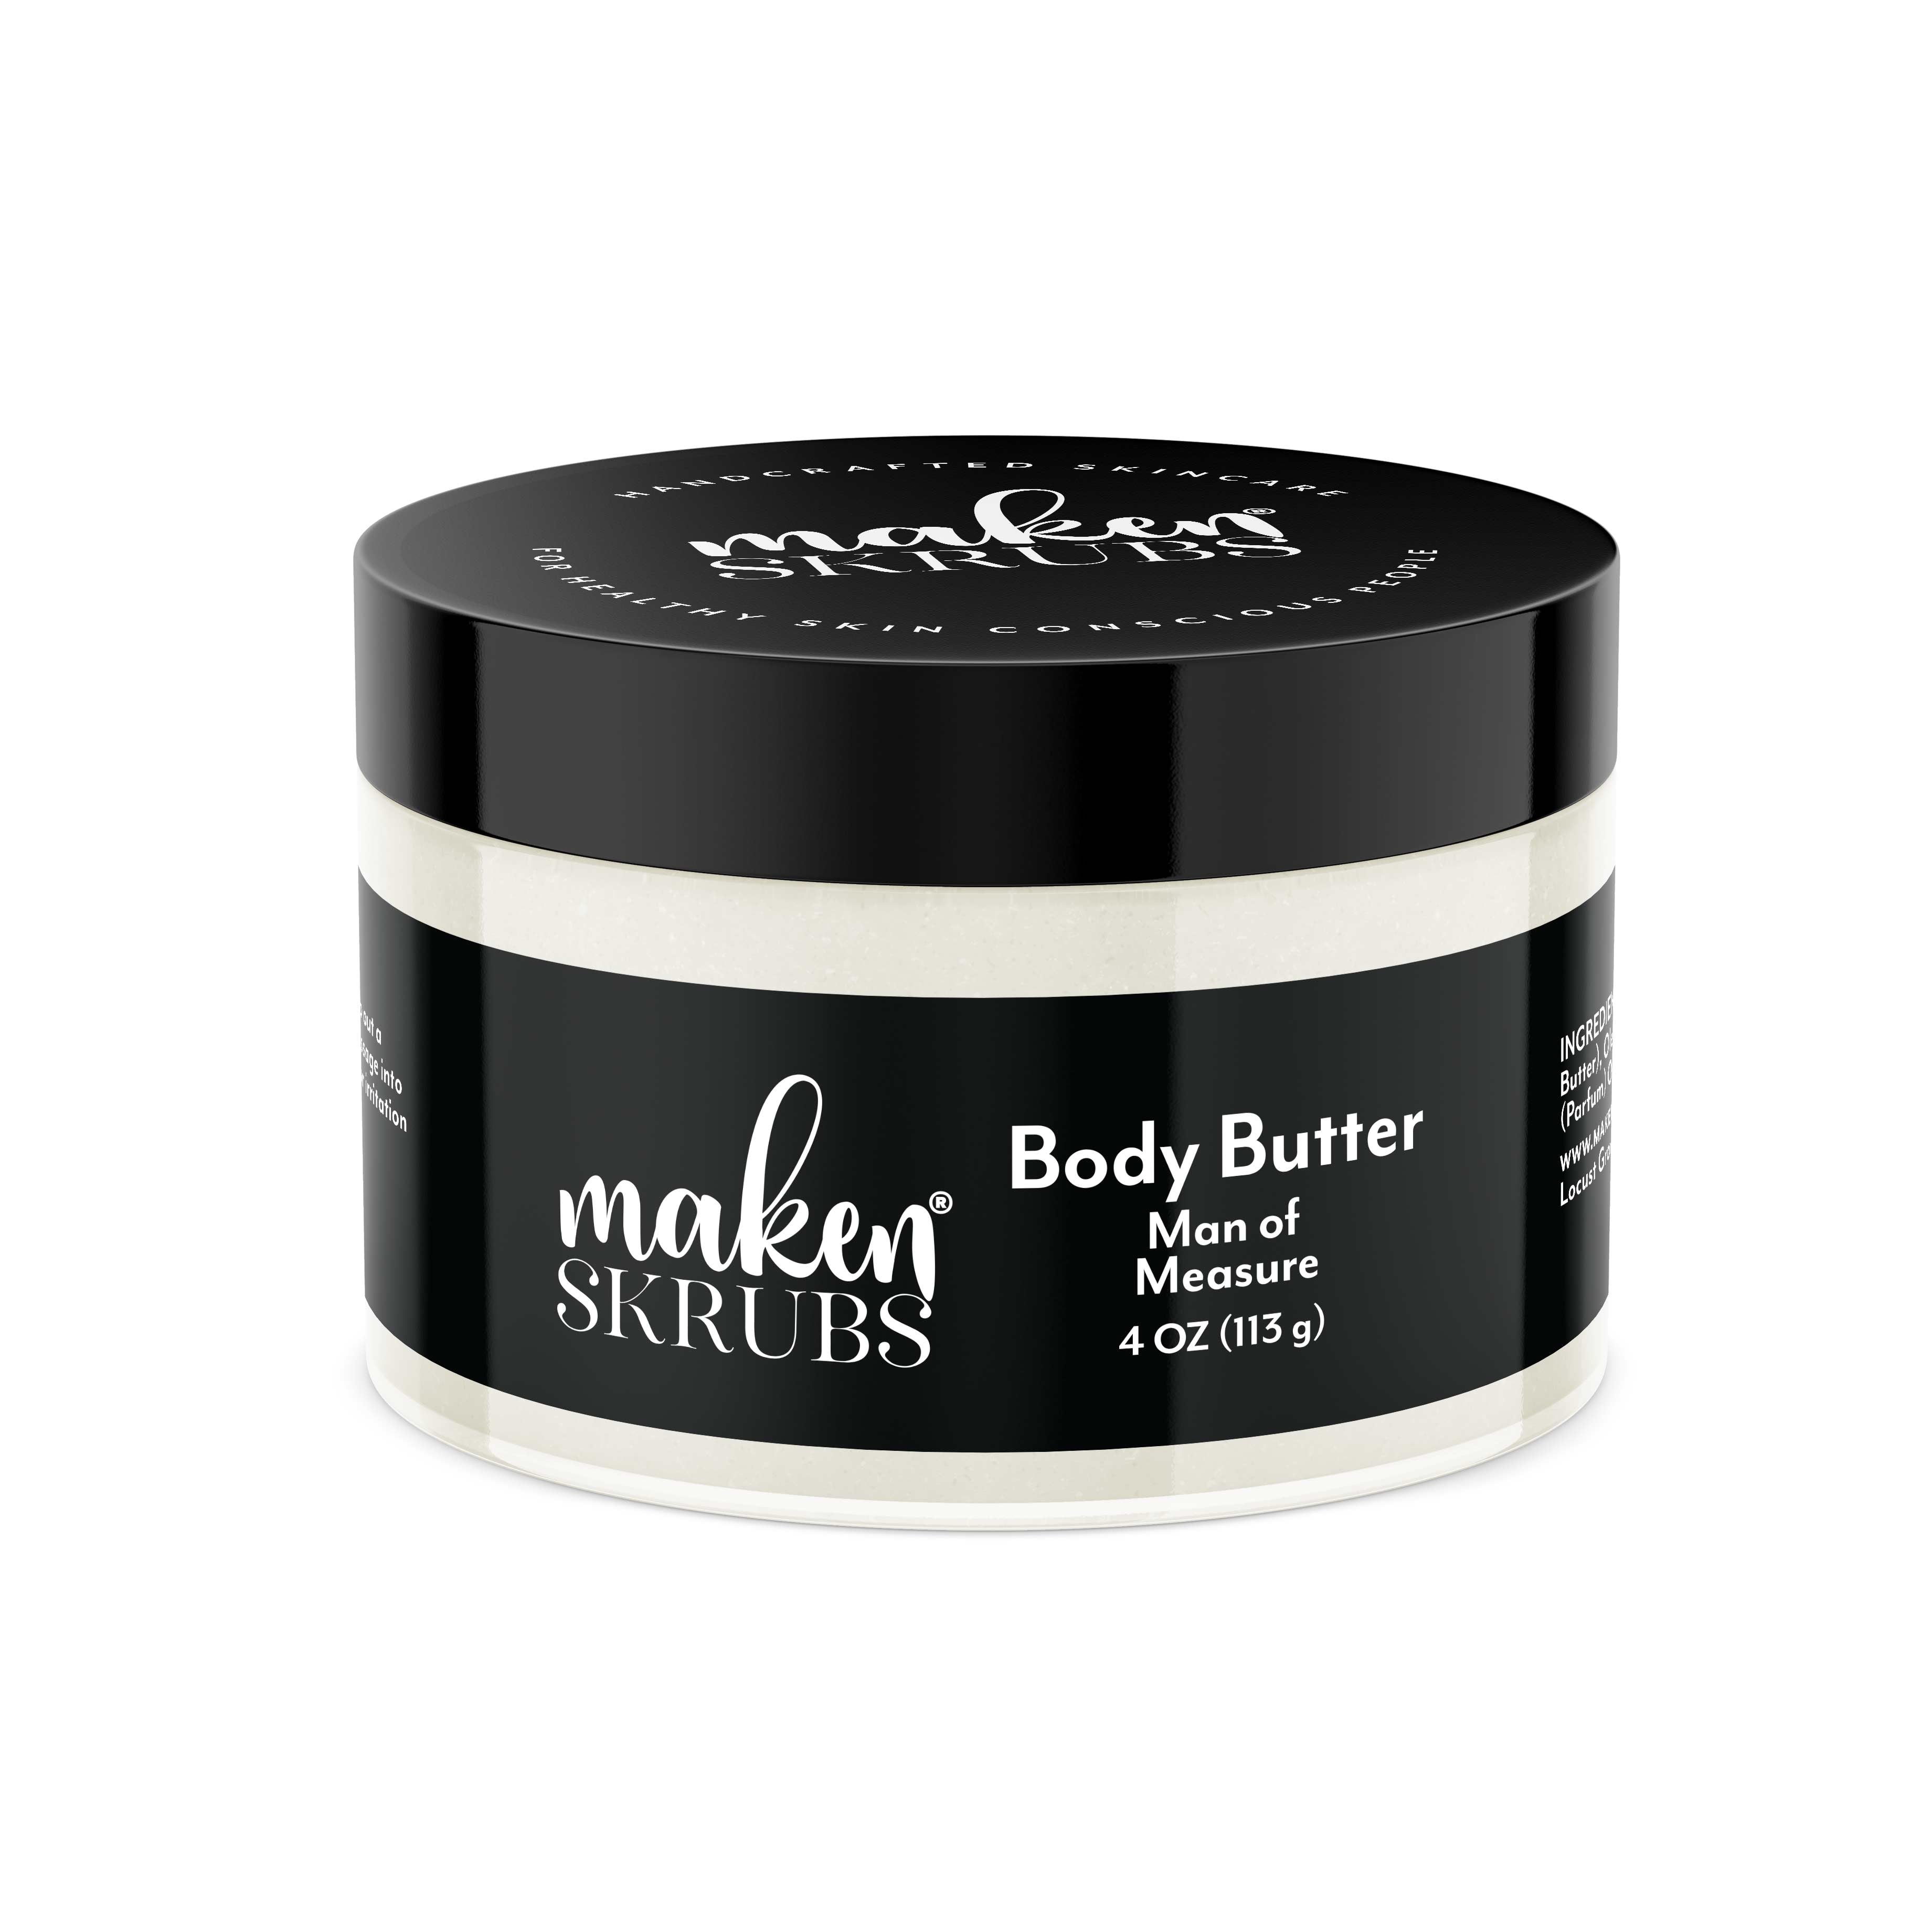 Man of Measure Whipped Body Butter